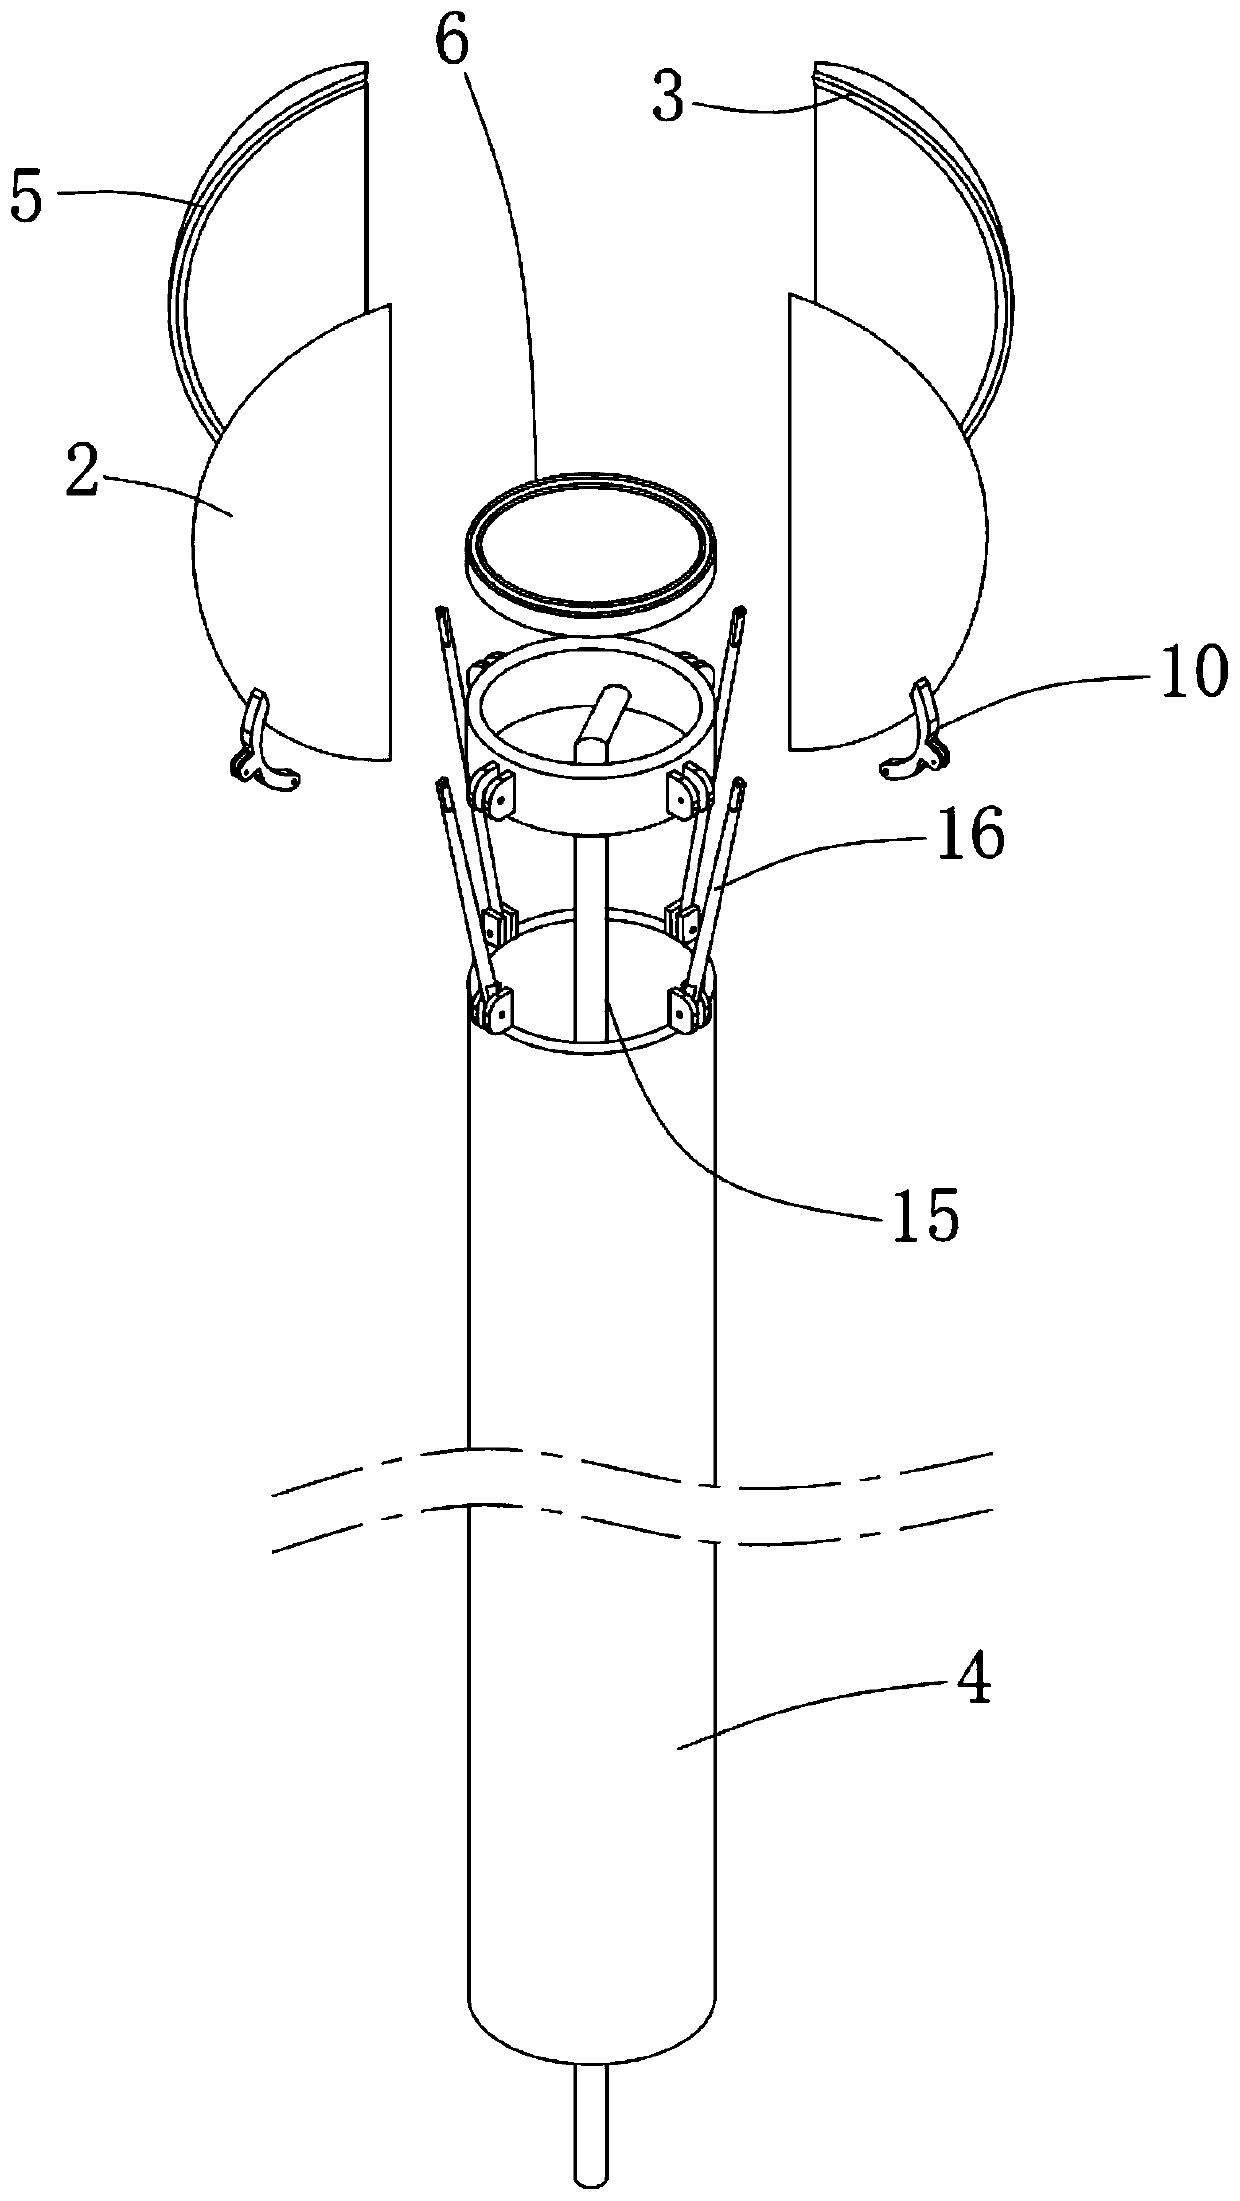 Excision device for excision of internal tissue